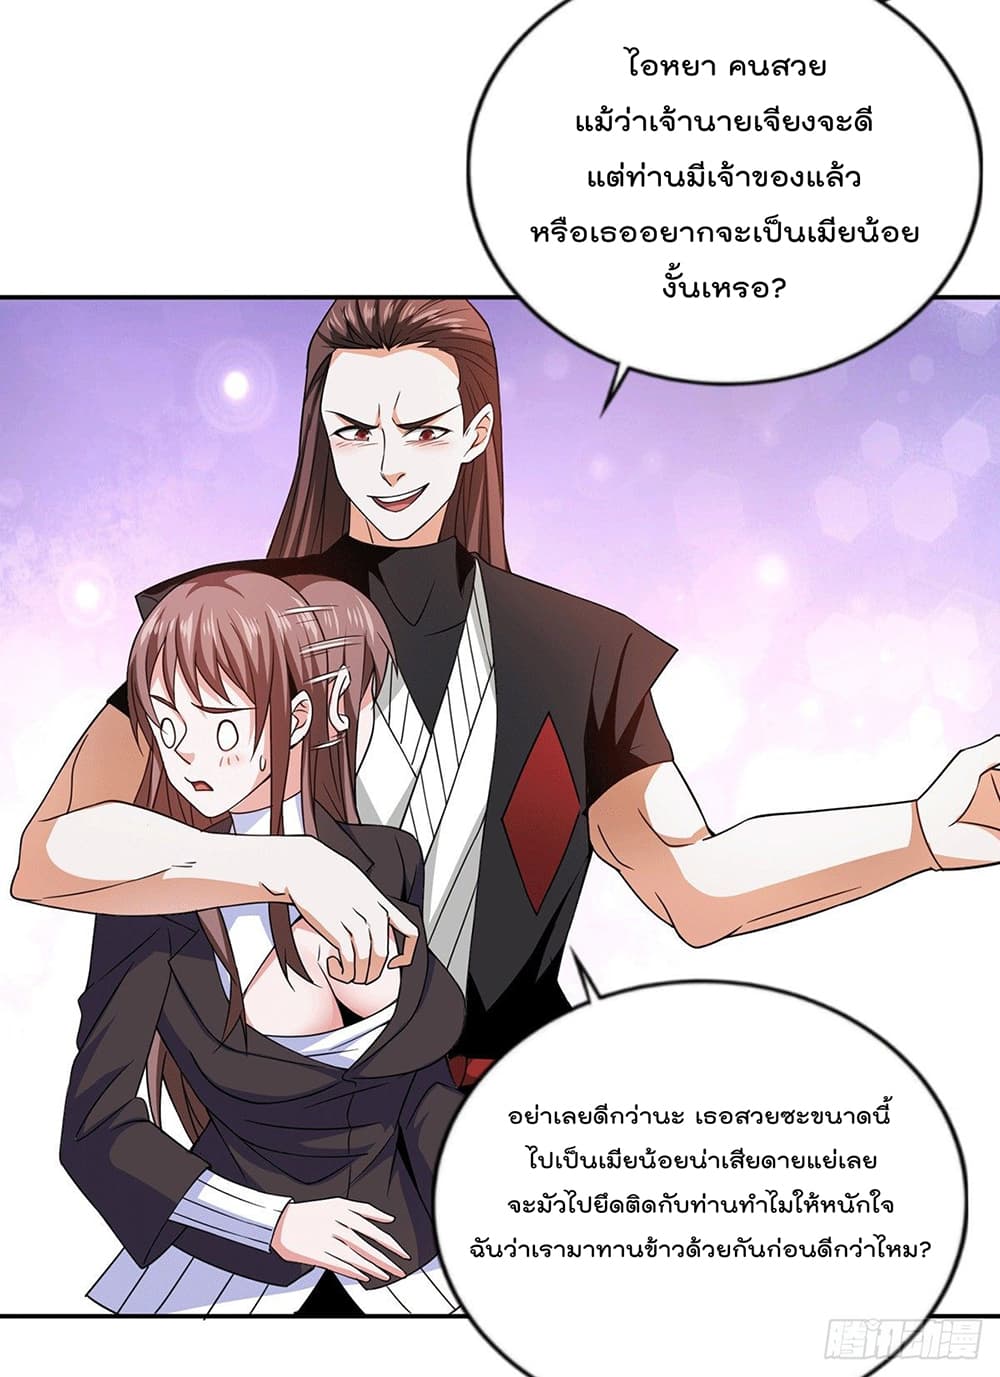 God Dragon of War in The City 48 (25)